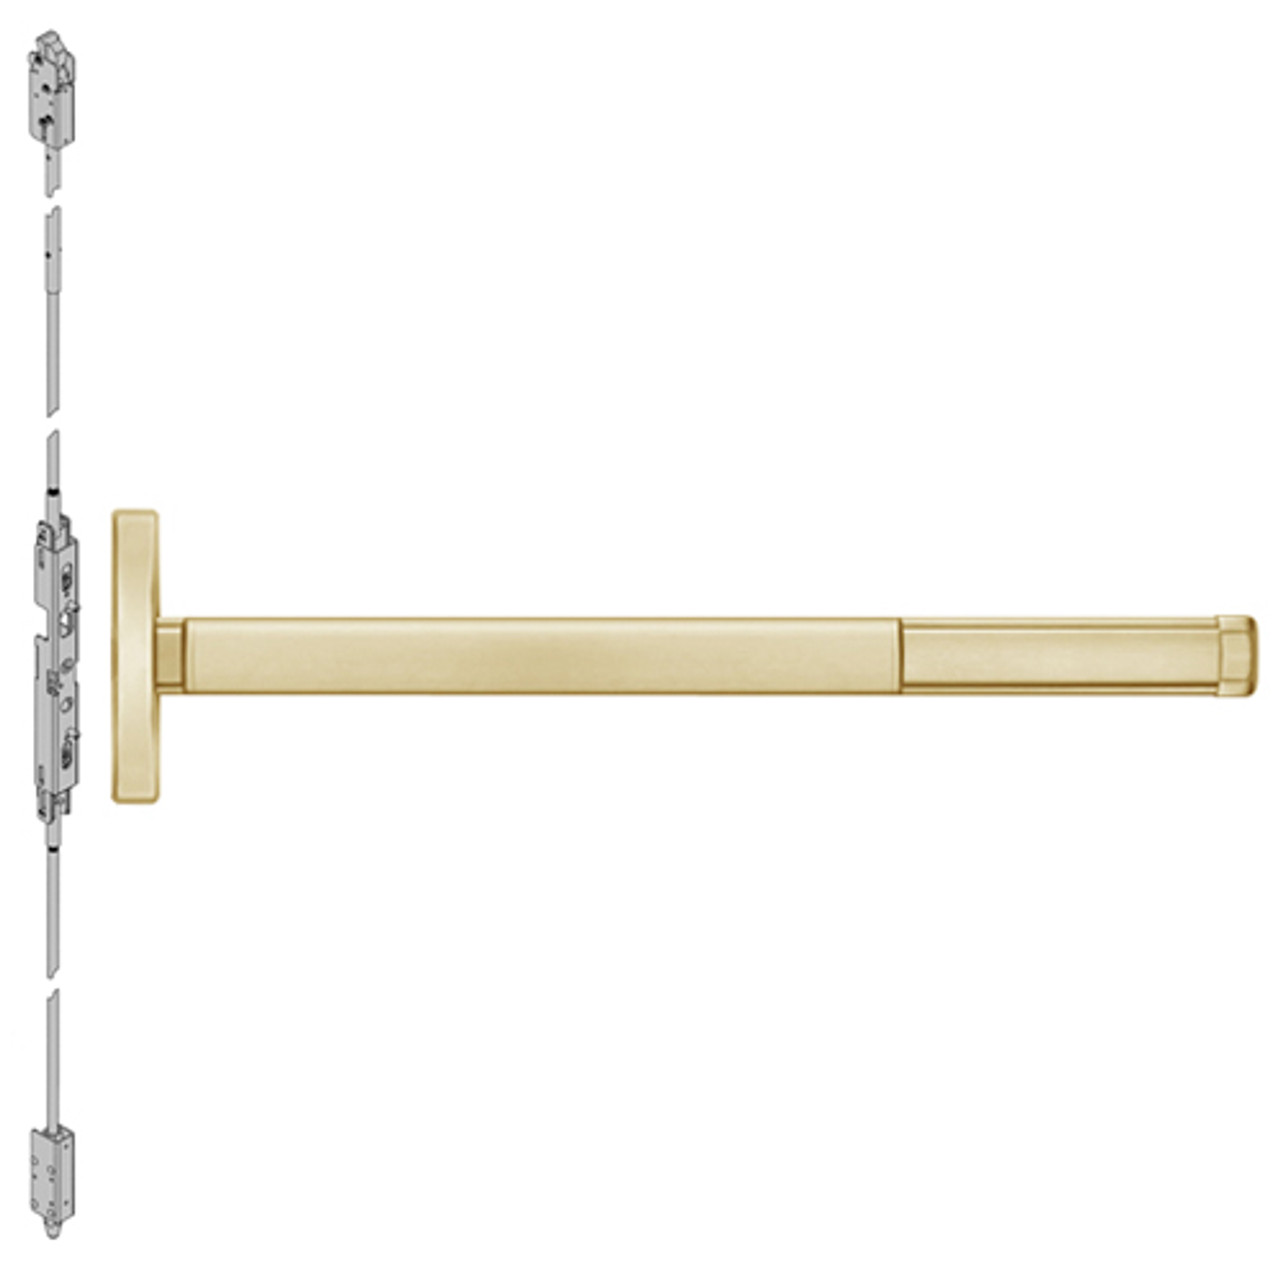 2602LBR-606-36 PHI 2600 Series Non Fire Rated Concealed Vertical Rod Exit Device Prepped for Dummy Trim with Less Bottom Rod in Satin Brass Finish